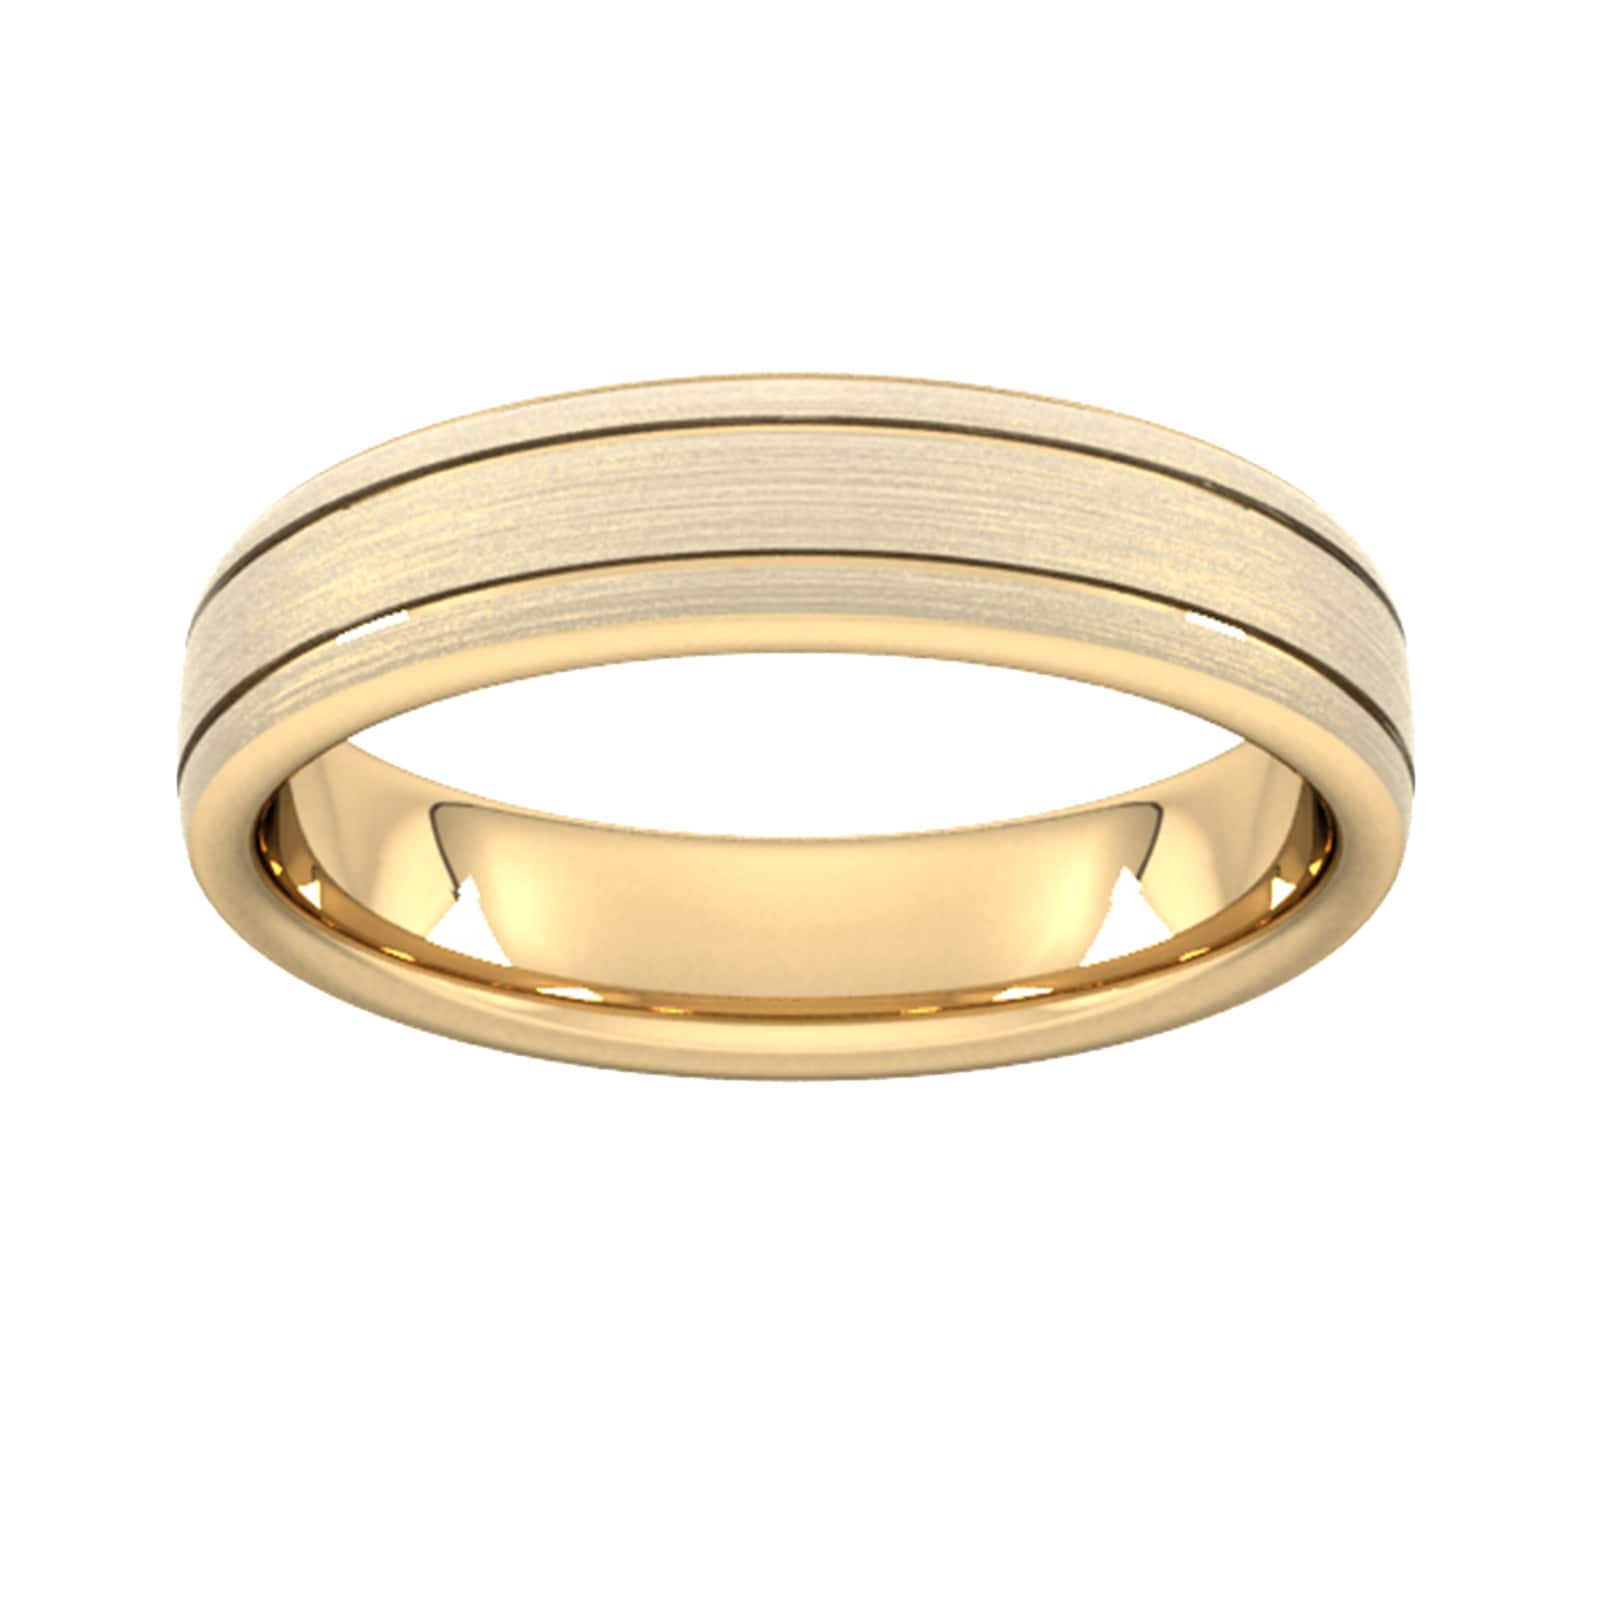 5mm Traditional Court Heavy Matt Finish With Double Grooves Wedding Ring In 18 Carat Yellow Gold - Ring Size T